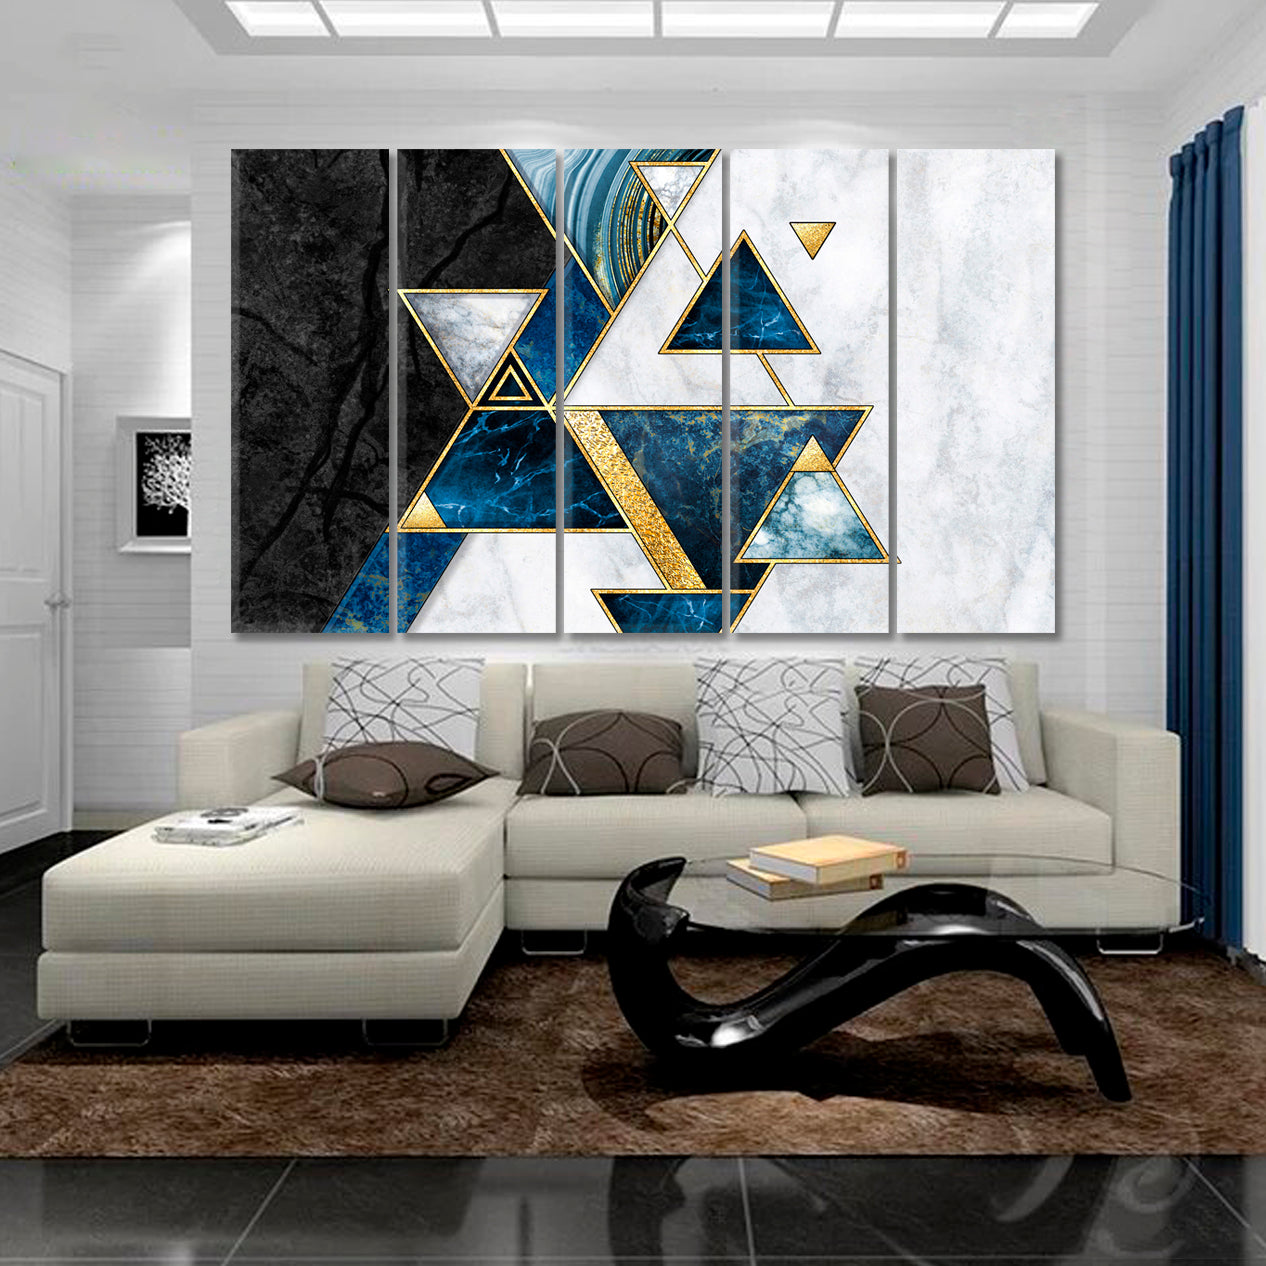 Abstract Geometric Modern Marble Mosaic Inlay Blue Gold Triangles Black White Stone Giclée Print Abstract Art Print Artesty 5 panels 36" x 24" 